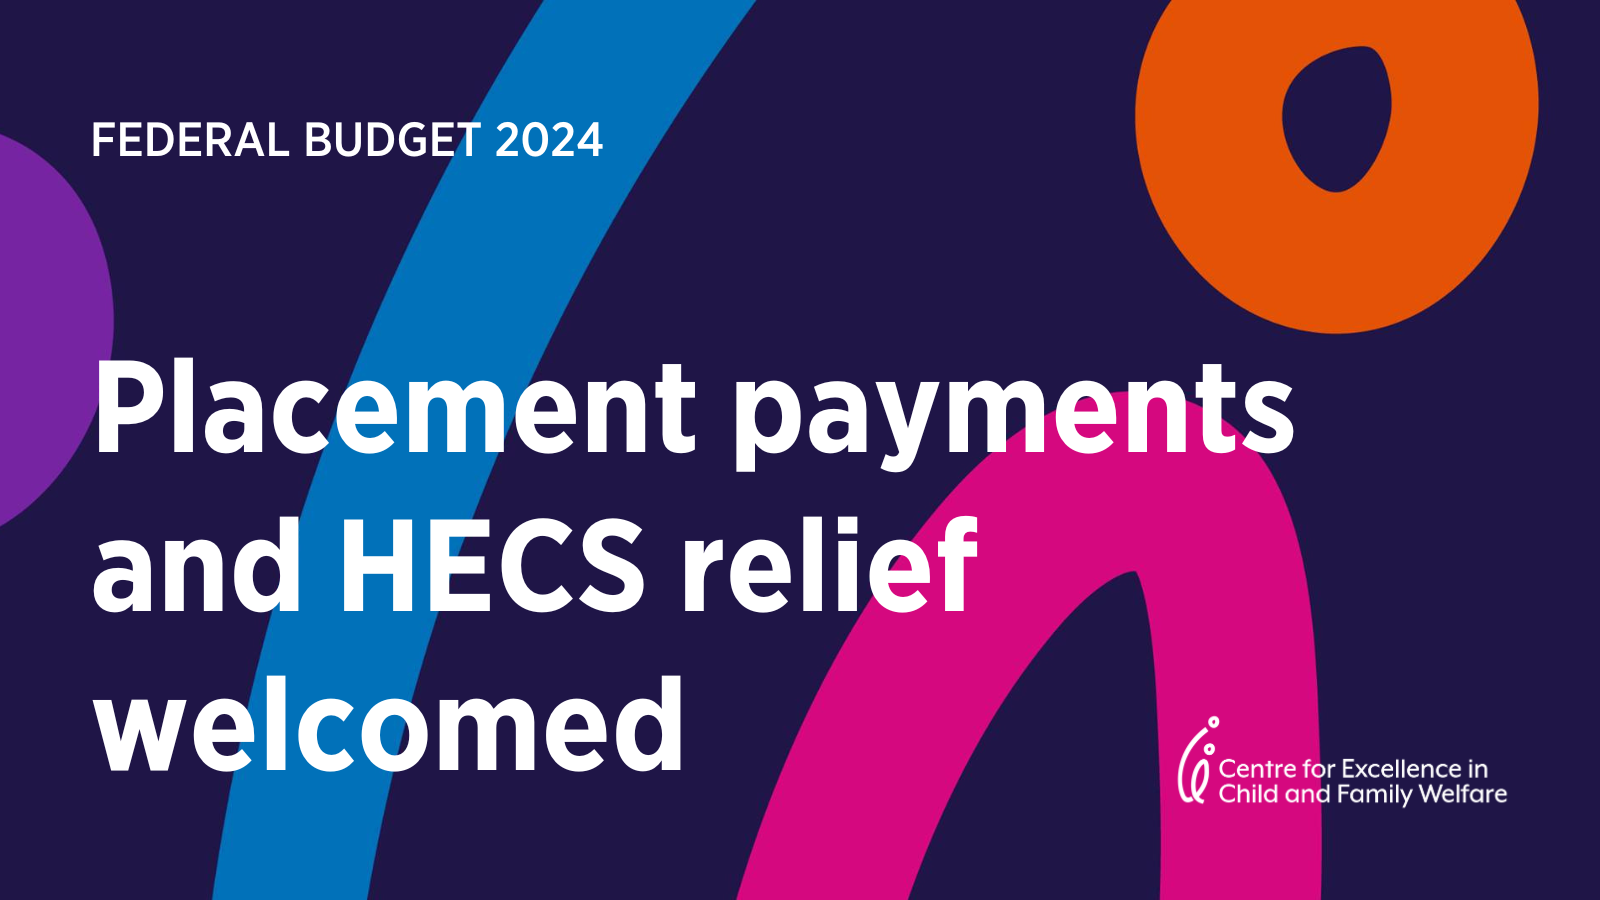 Placement payments and HECS relief welcomed in Federal Budget